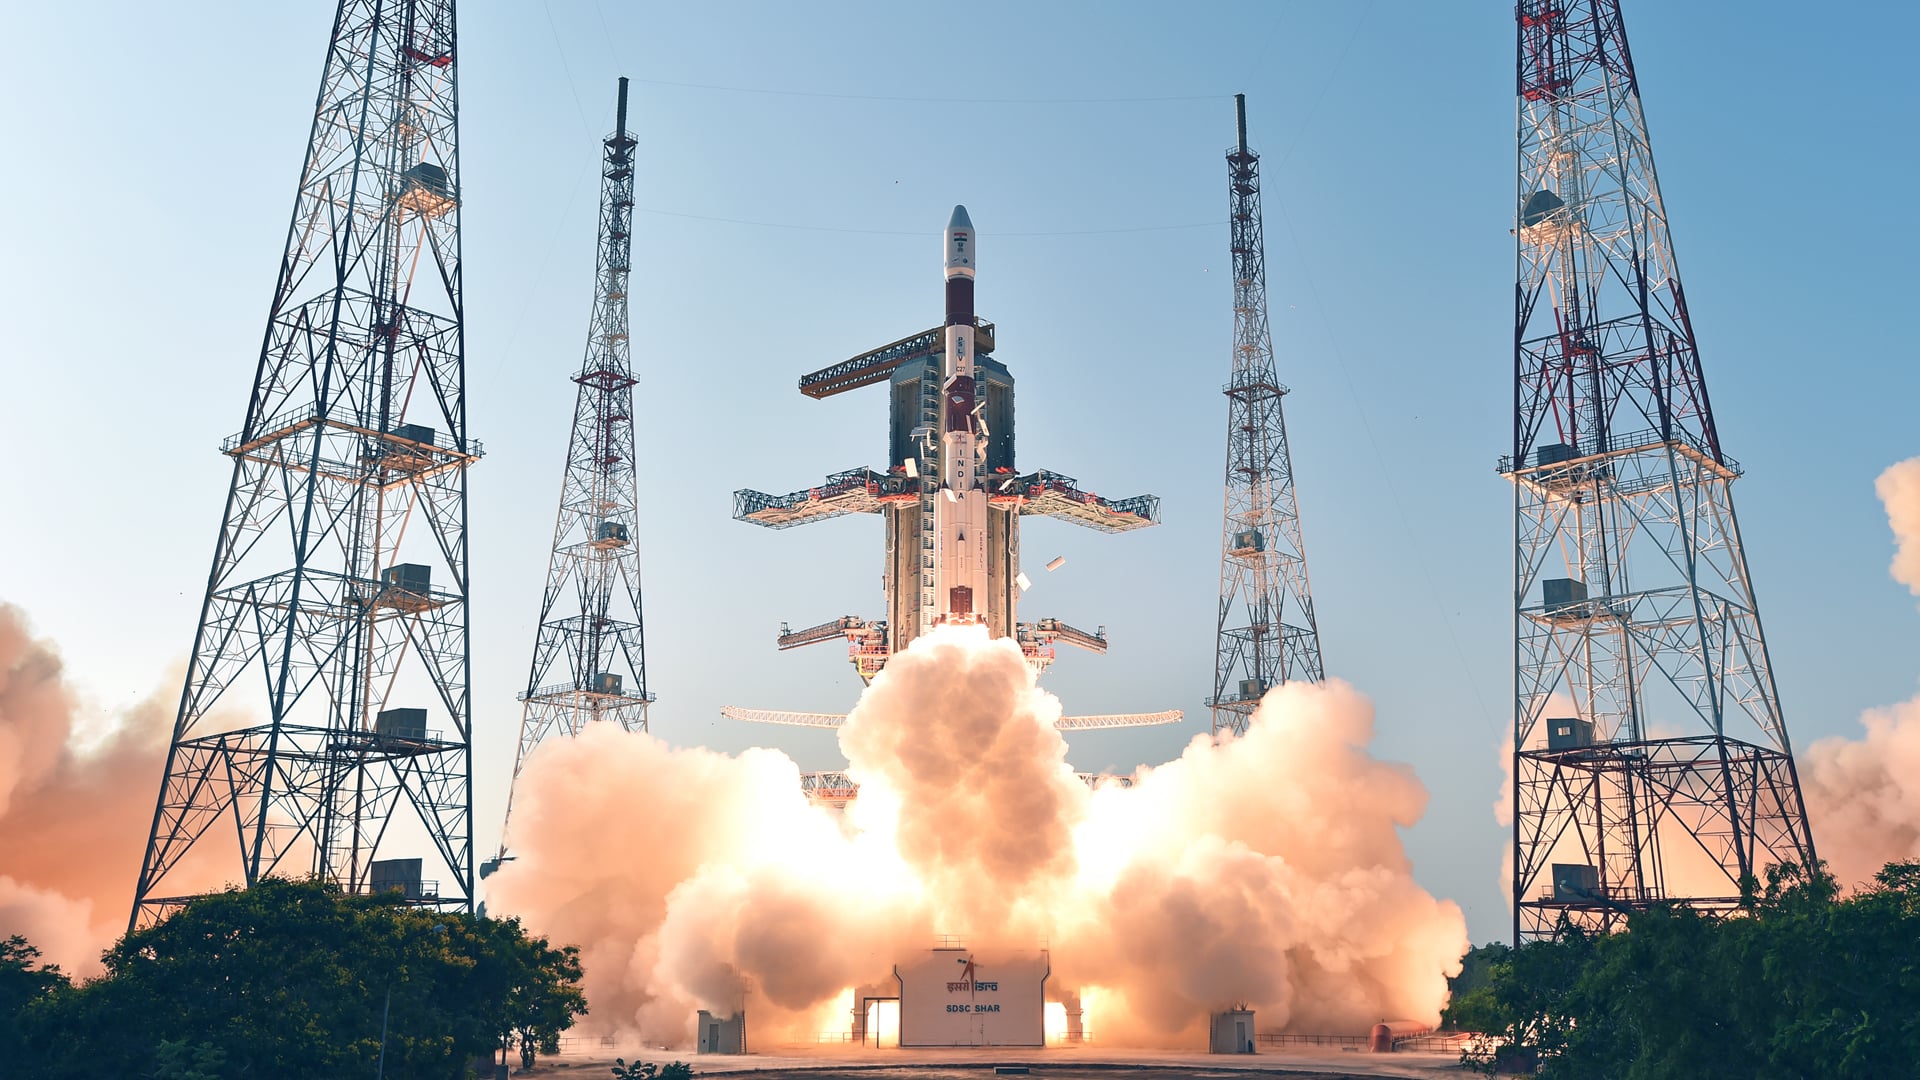 Nearly 60 start-ups registered with ISRO since opening of space sector: Union Minister